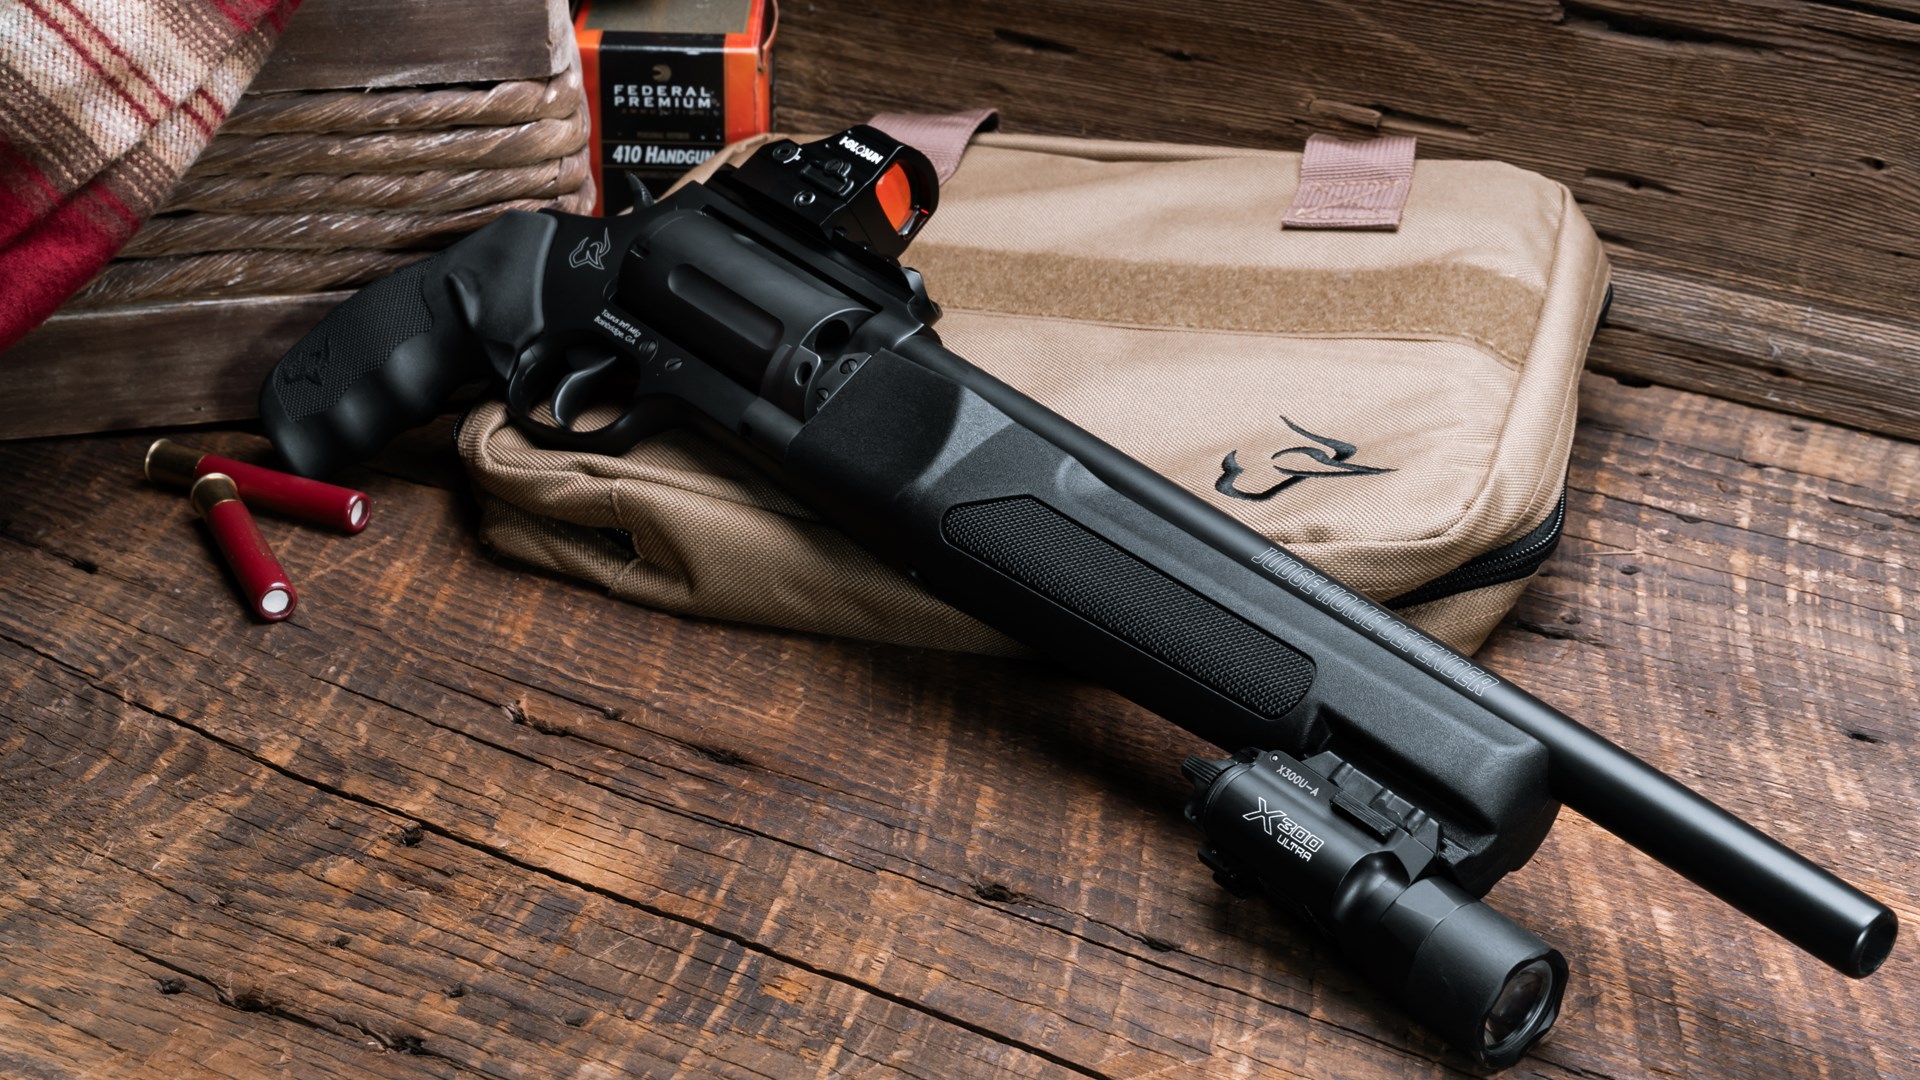 The Taurus Judge Home Defender lays on a tan bag, with a flashlight and optic mounted.